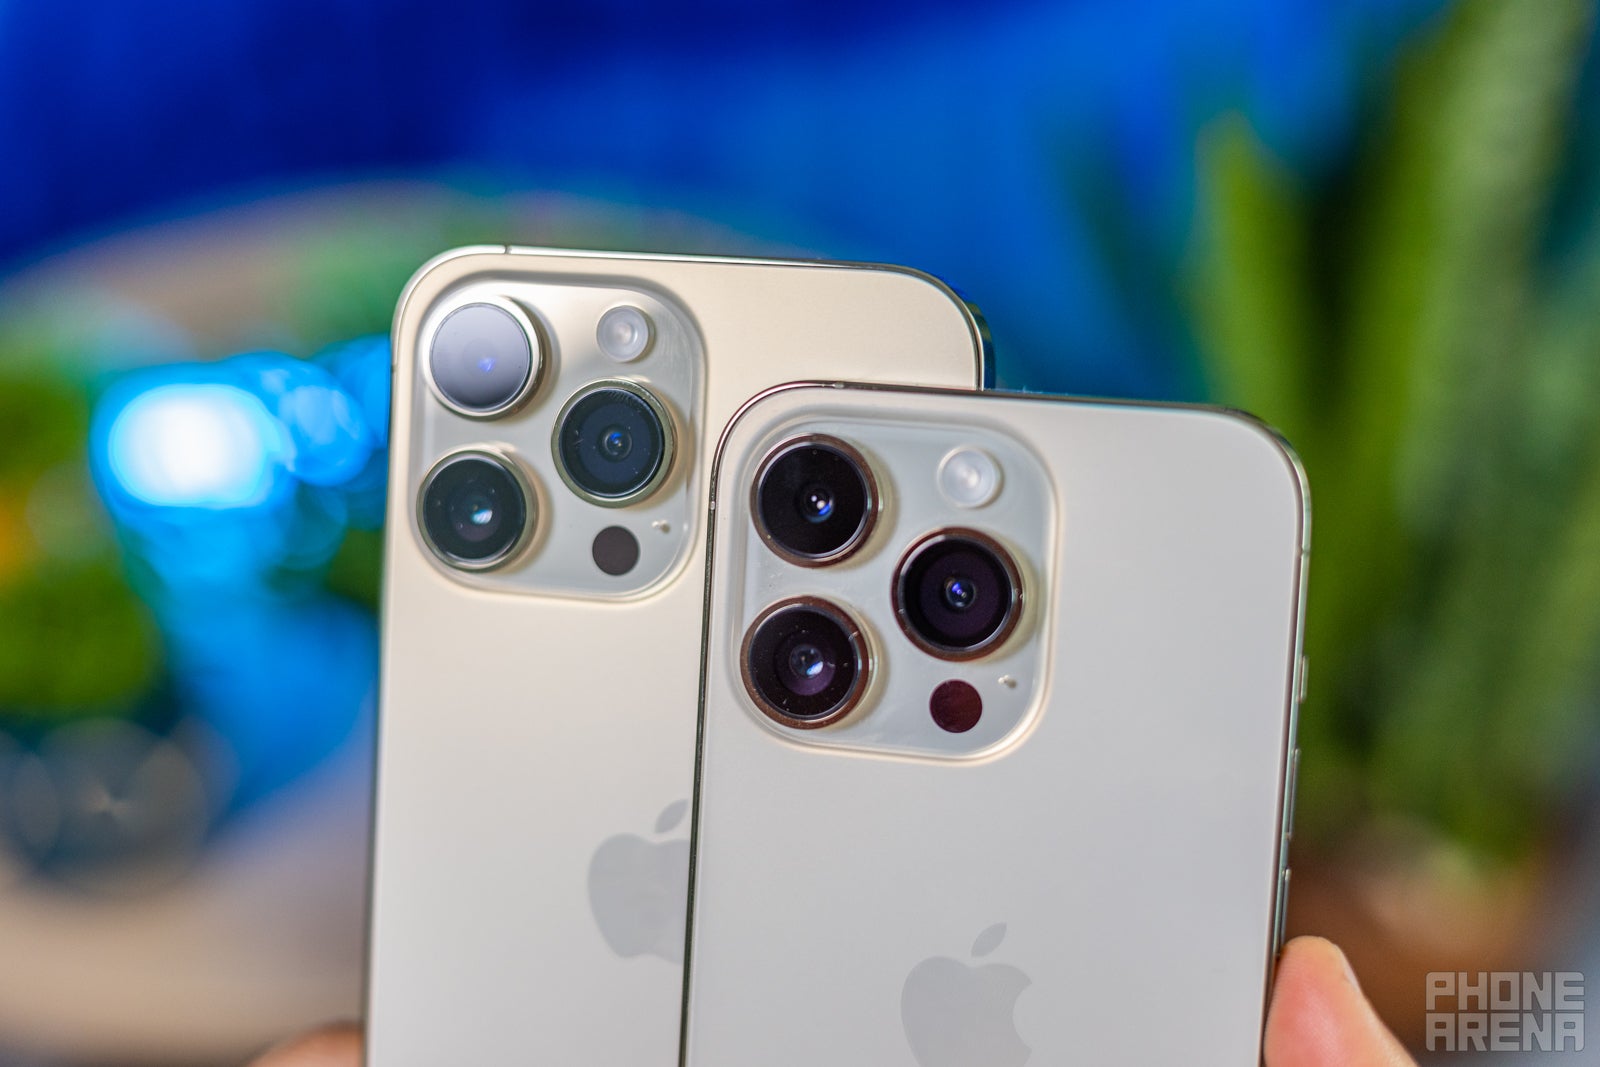 Triple-camera systems make all the difference in contrast with the regular iPhone 14 models (Image Credit - PhoneArena) - Apple iPhone 14 Pro Max vs iPhone 14 Pro: The itch to switch